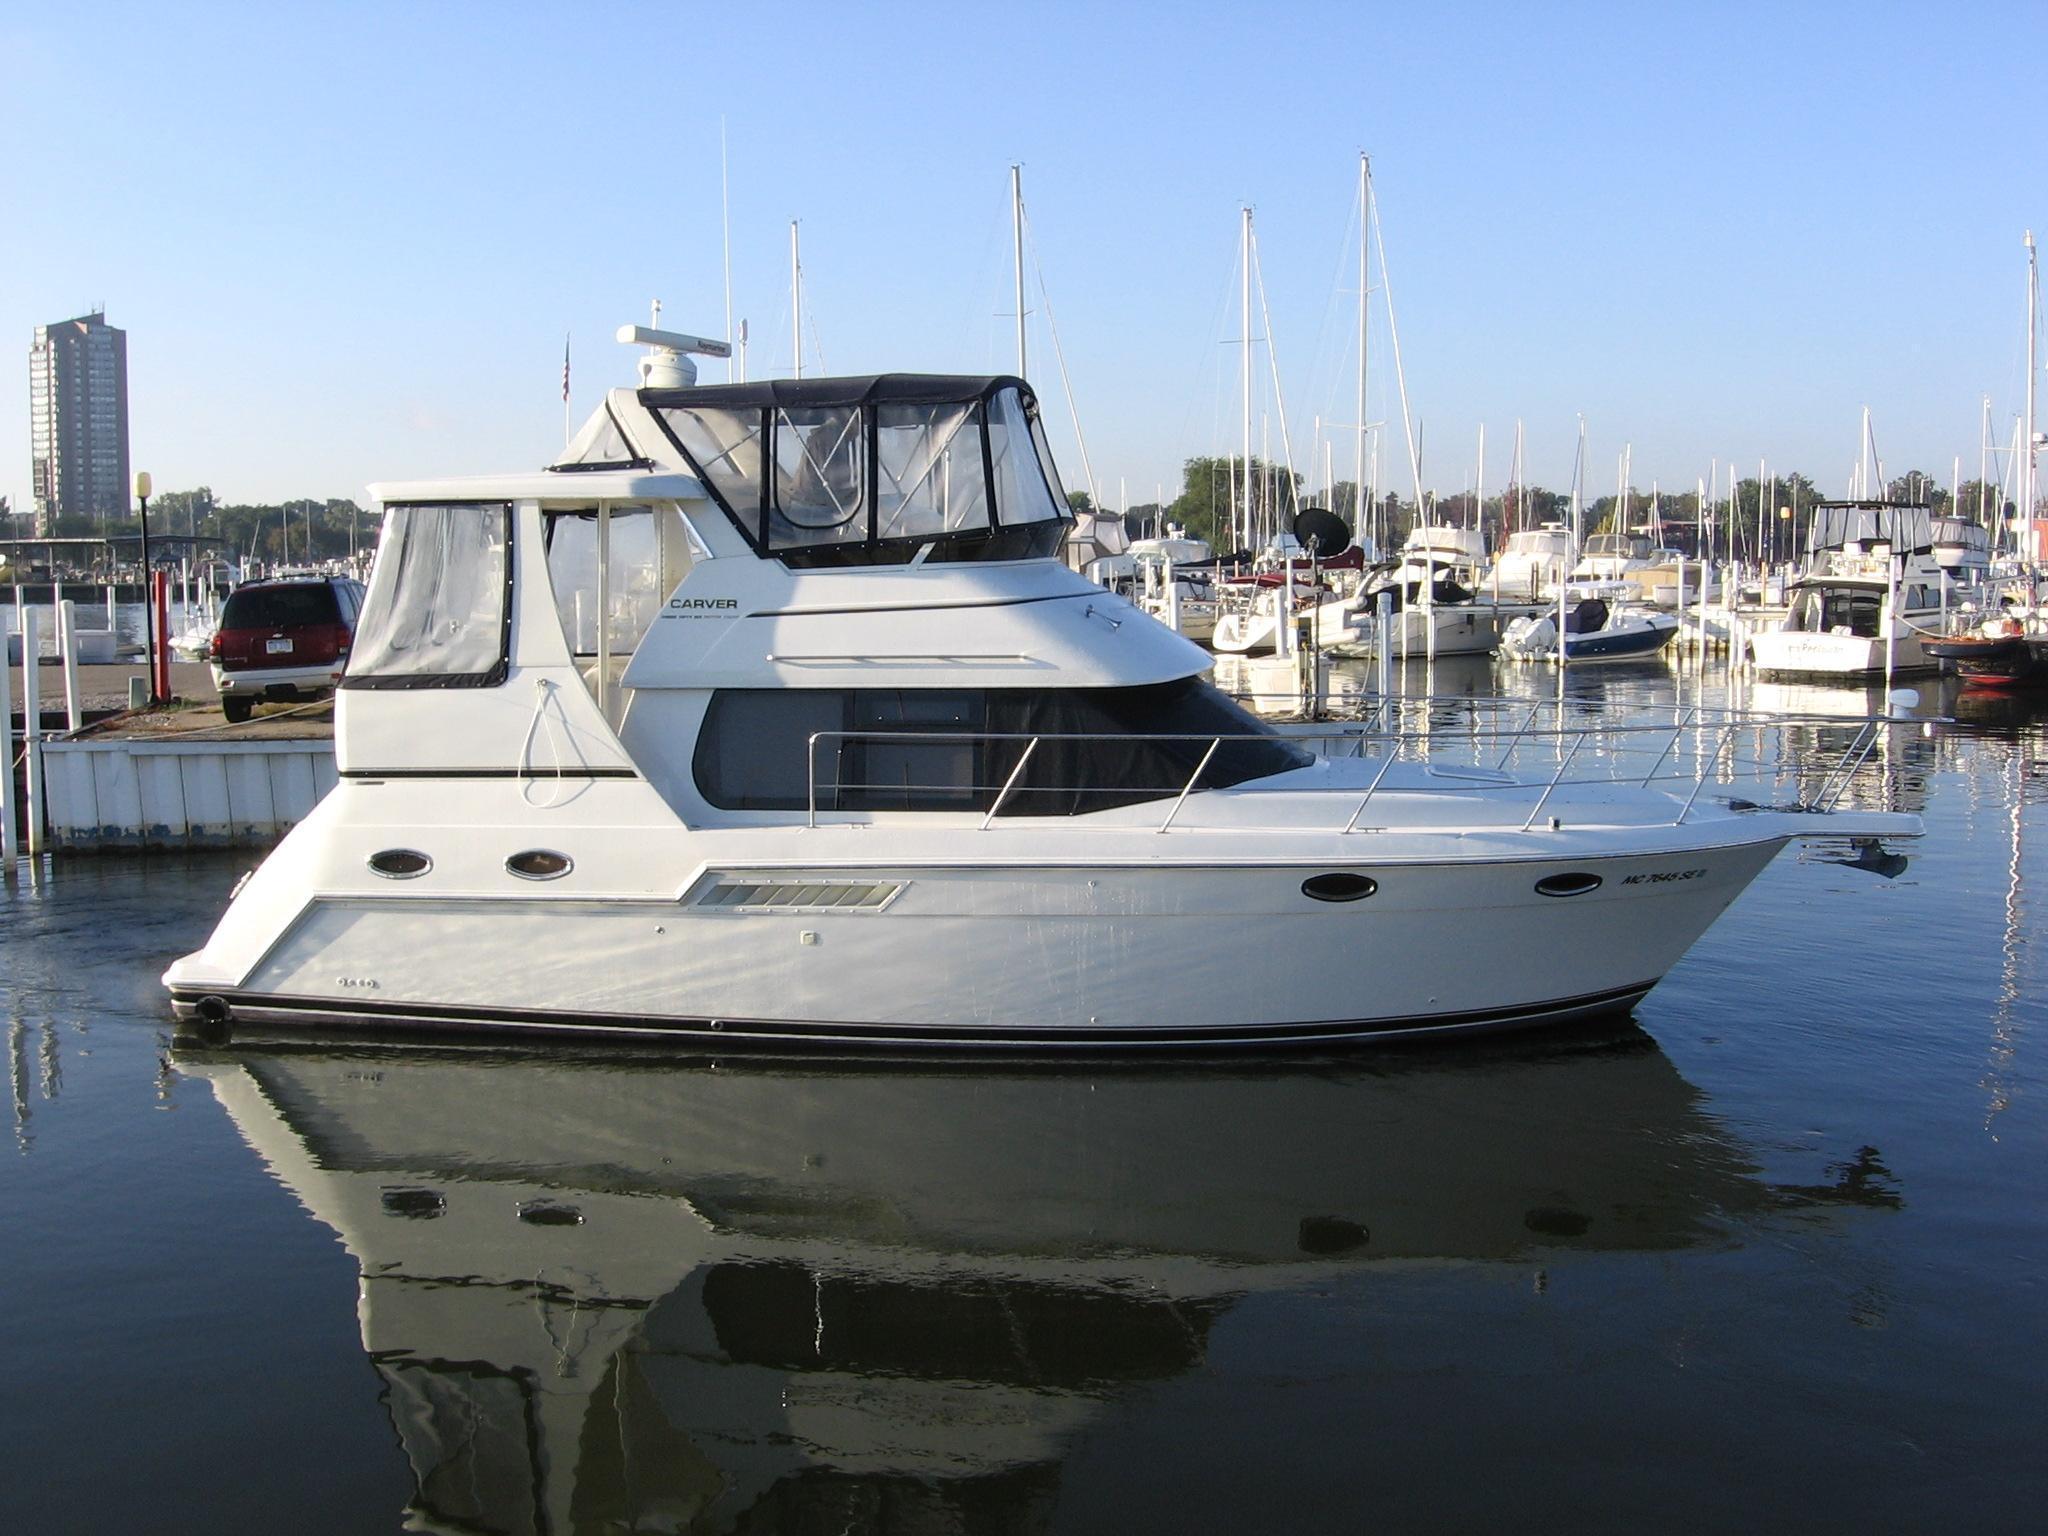 Carver 356 Motor Yacht, St. Clair Shores